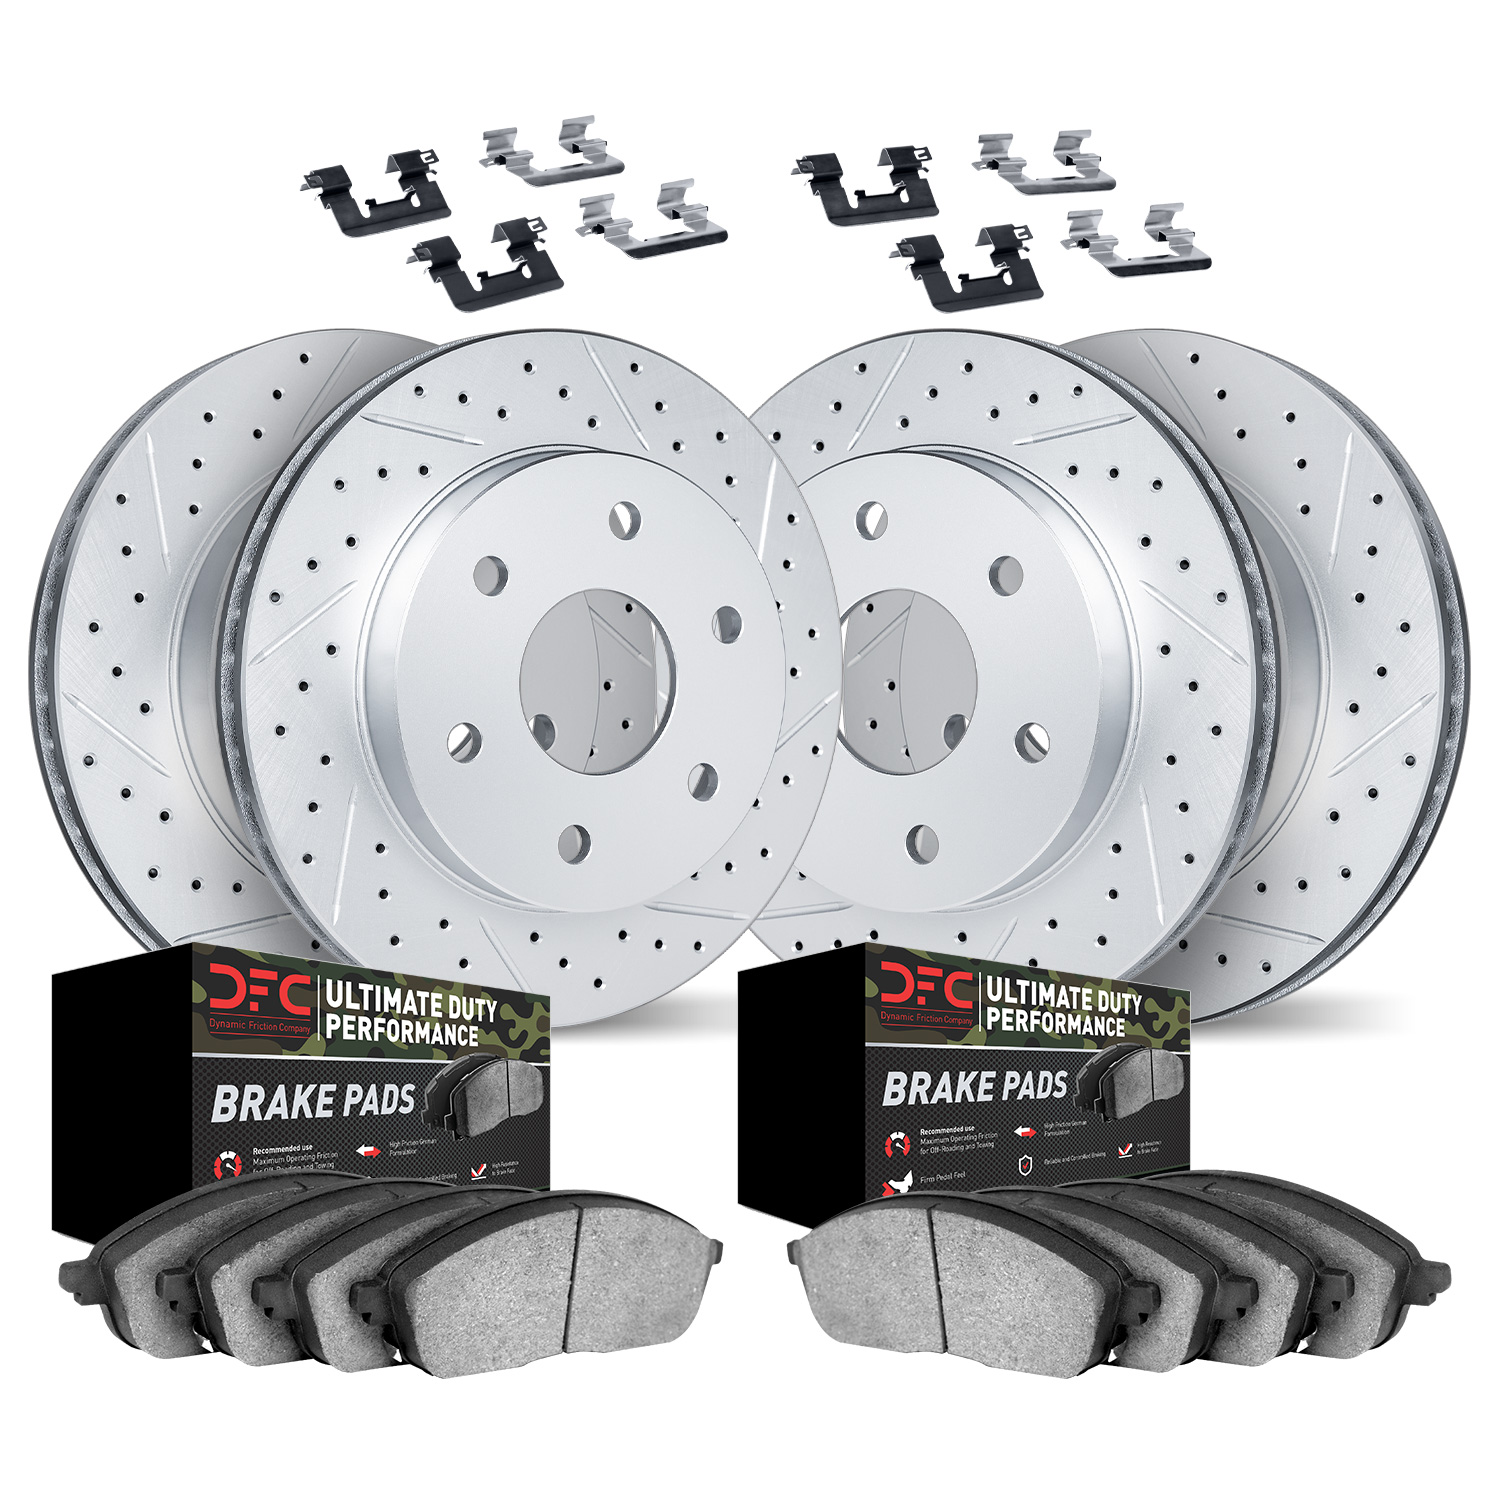 2414-67007 Geoperformance Drilled/Slotted Brake Rotors with Ultimate-Duty Brake Pads Kit & Hardware, Fits Select Infiniti/Nissan